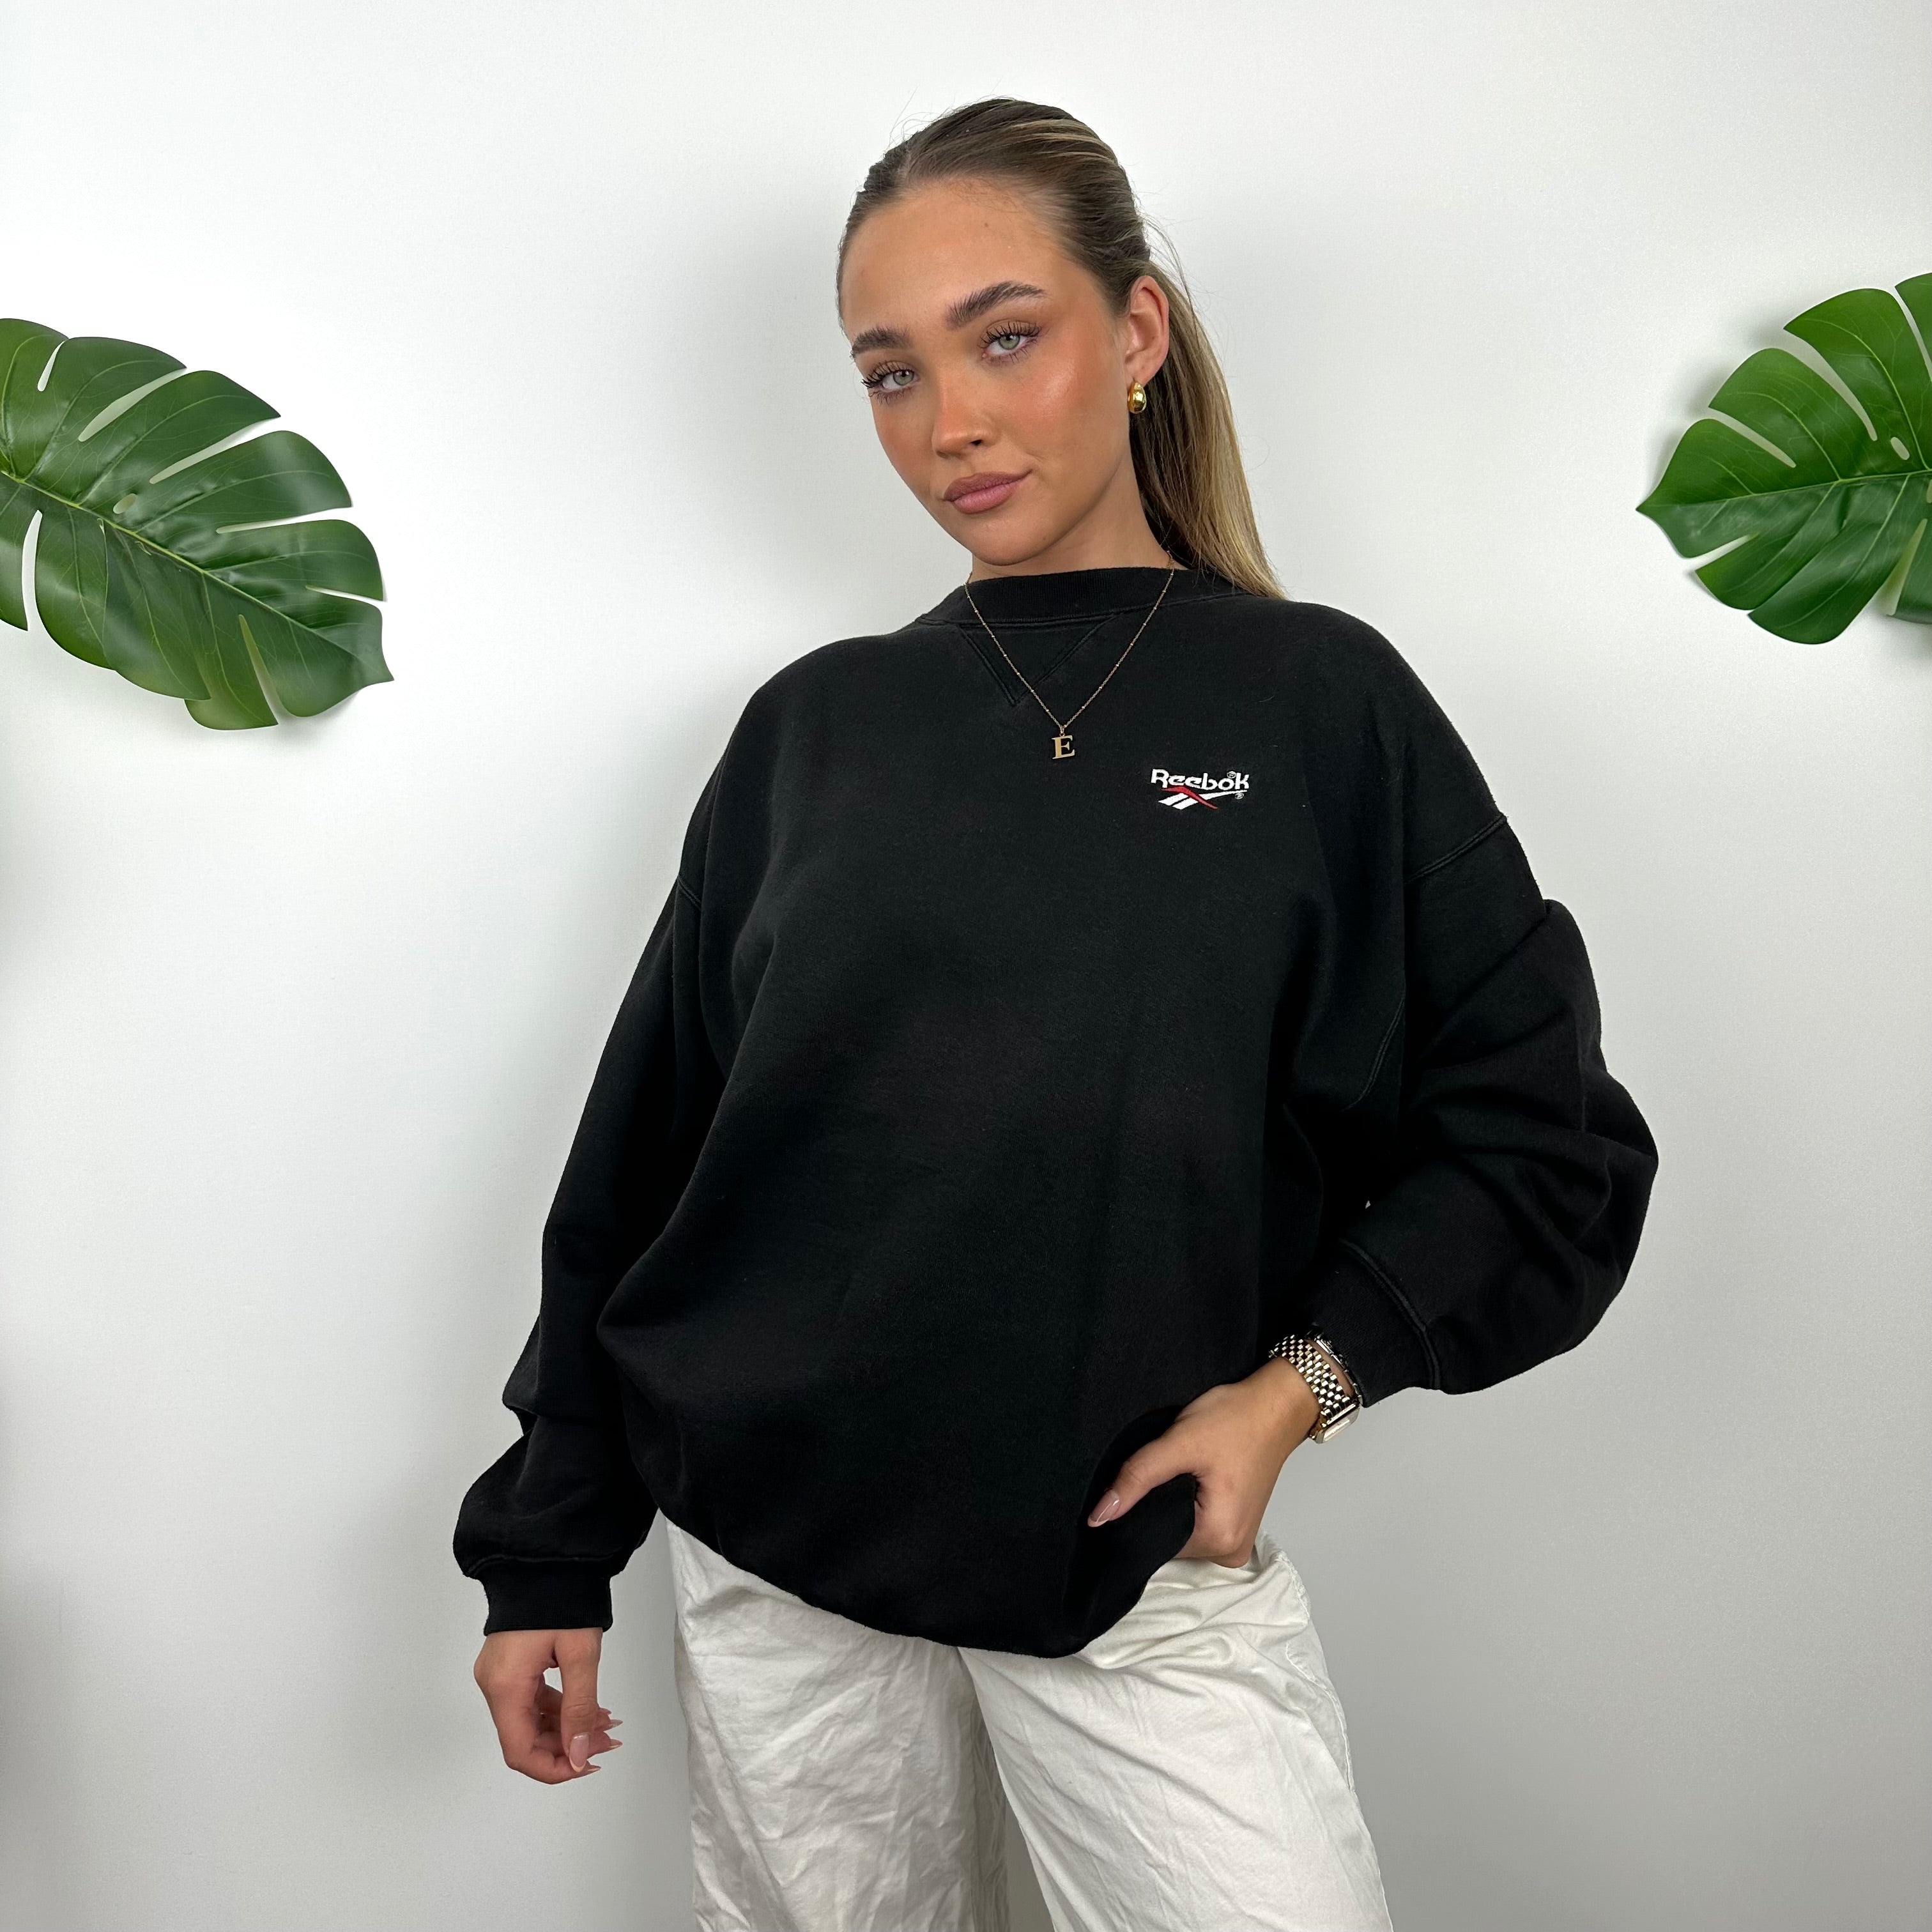 Reebok Black Embroidered Spell Out Sweatshirt (XL)